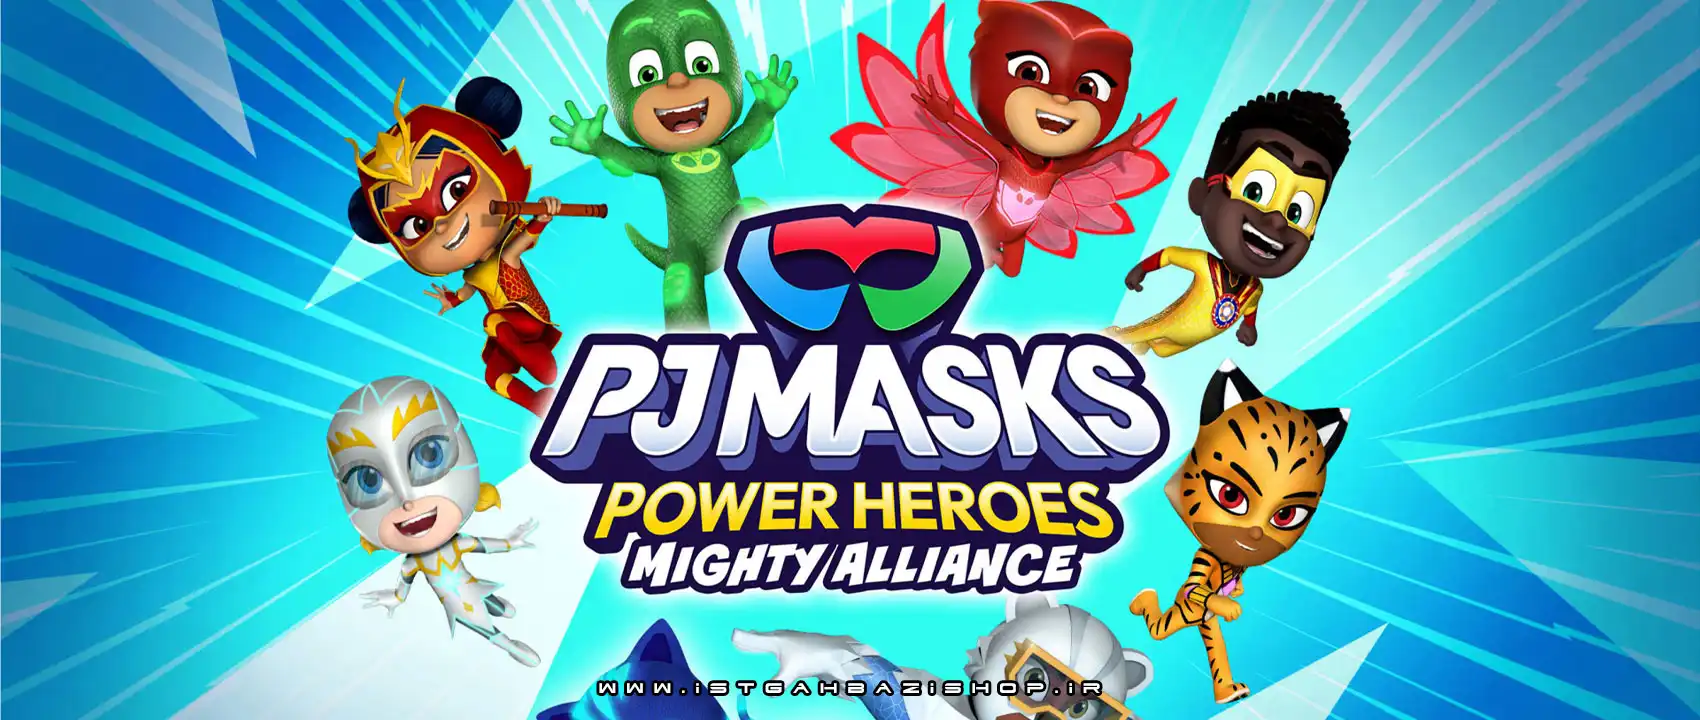 PJ Masks Power Heroes Mighty Alliance Ps4